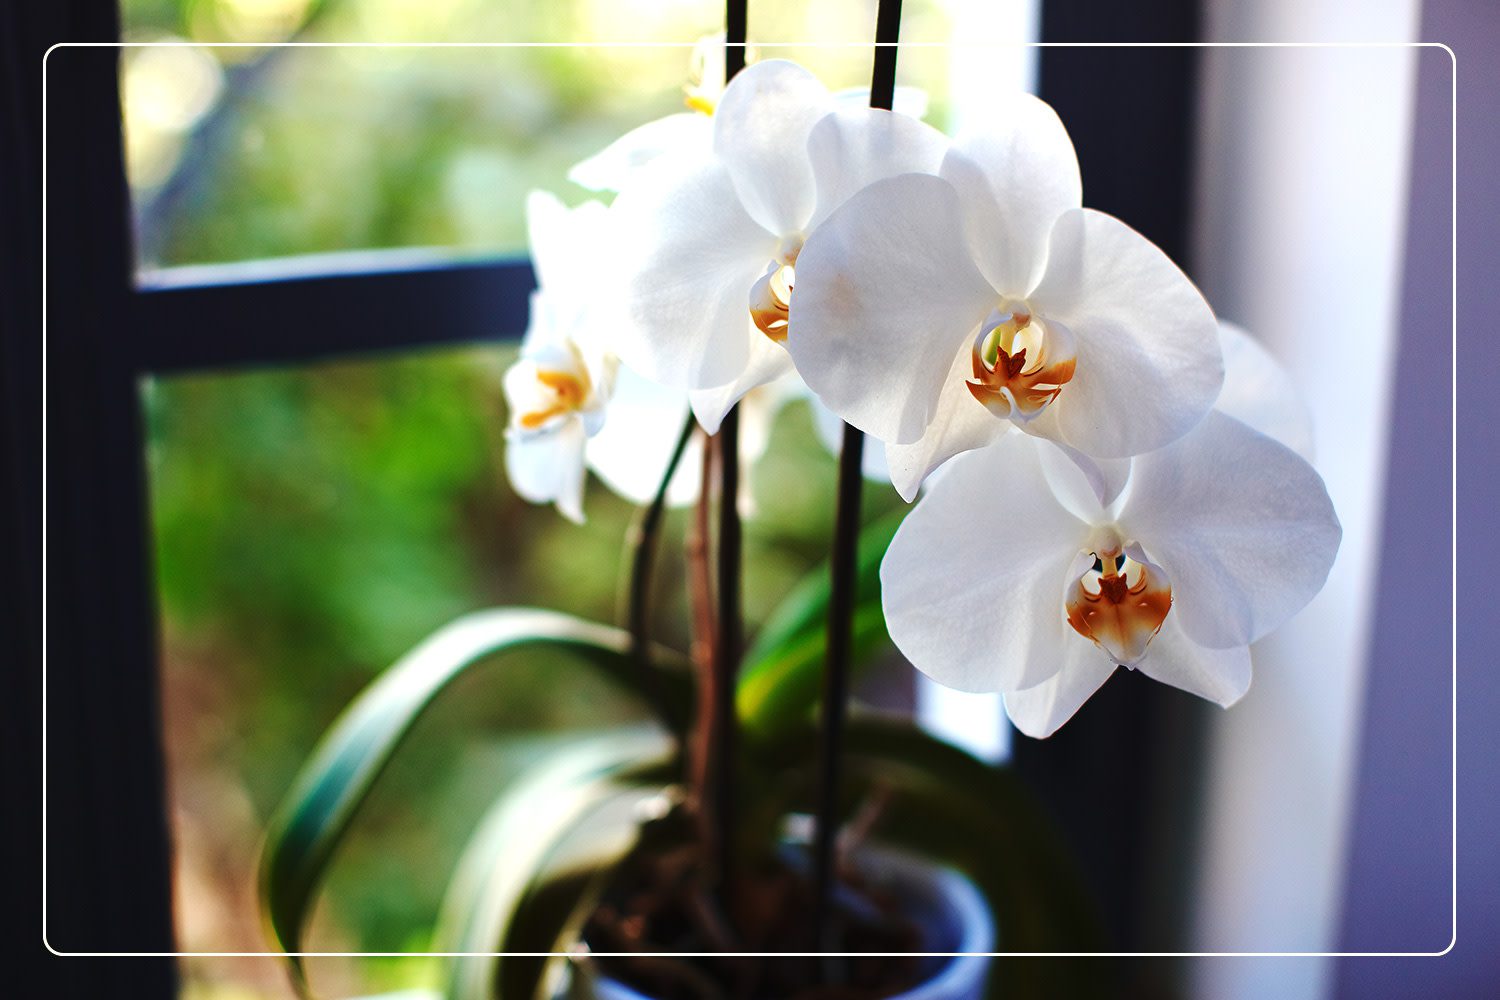  a white Orchid (Phalaenopsis sp.), which is a nontoxic houseplant, grows indoors next to a window